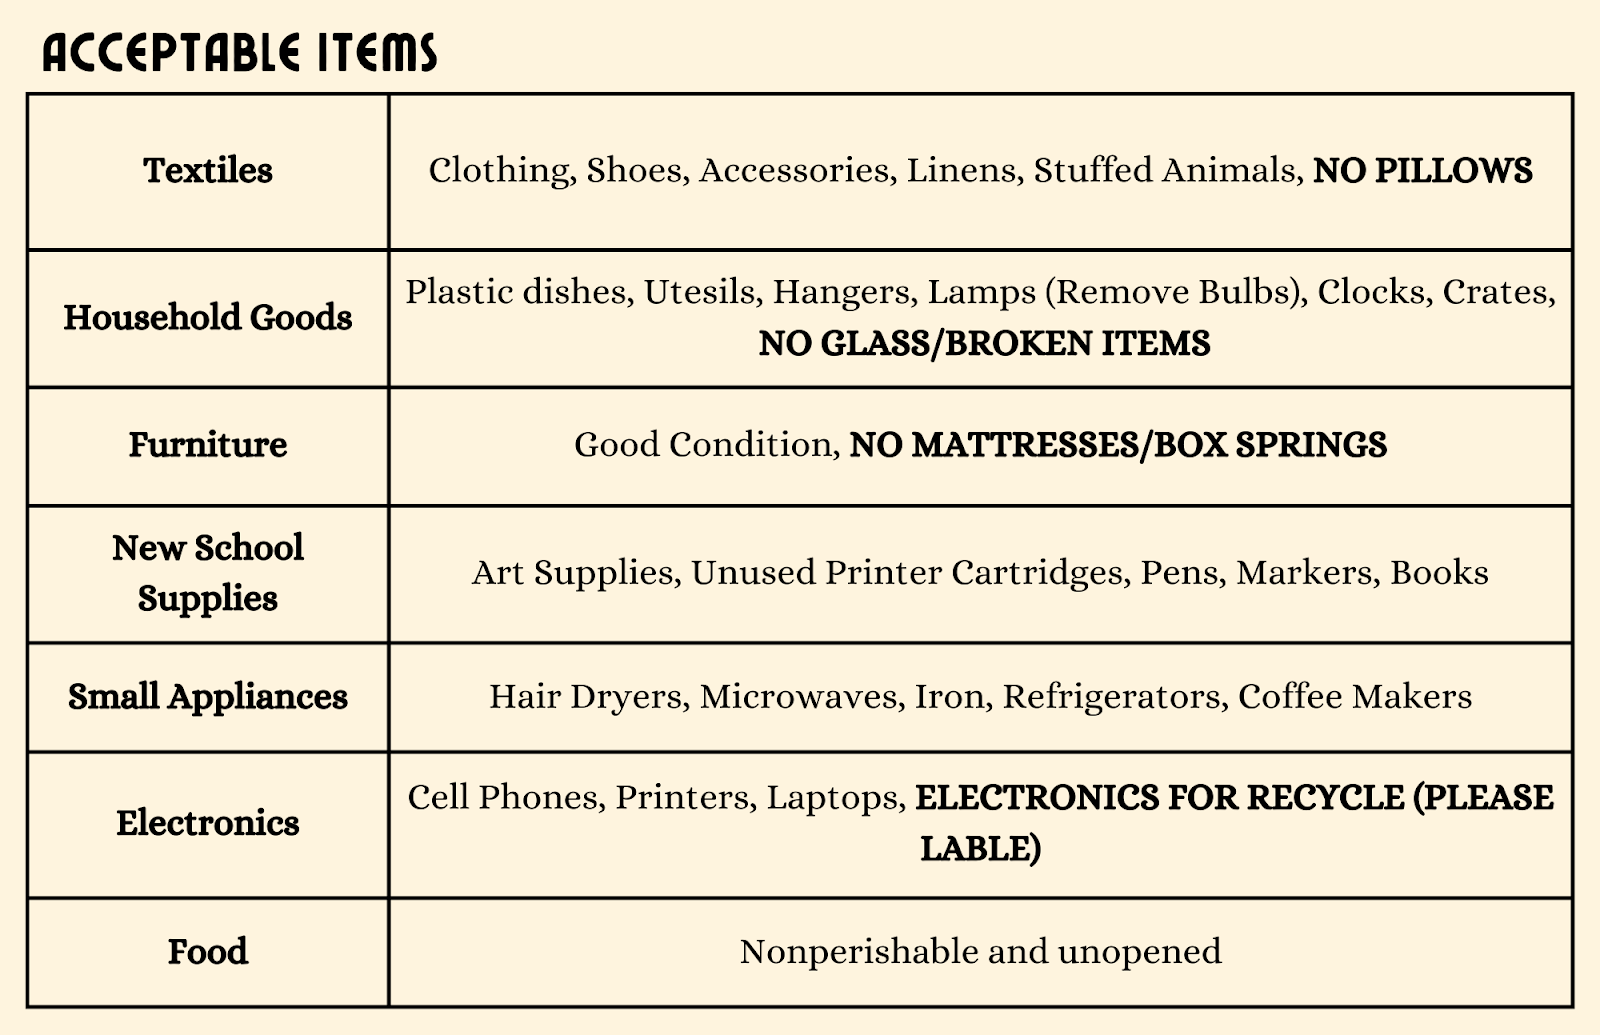 Acceptable items textiles [clothing, shoesm accessories, linens, stuffed animals, no pillows] household goods [plastic dishes, utensils, hangers, lamps (remove bulbs), clocks, crates no glass/broken items], furniture [good condition (no mattresses/box springs)], new school supplies [art supplies, unused print cartridges, pens, markers, books], small appliances [hair dryers, mircowaves, iron, refrigerators, coffee makers], electronics [cell phones, printers, laptops, (electronics to recycle please label)], food [nonperishable and unopened]